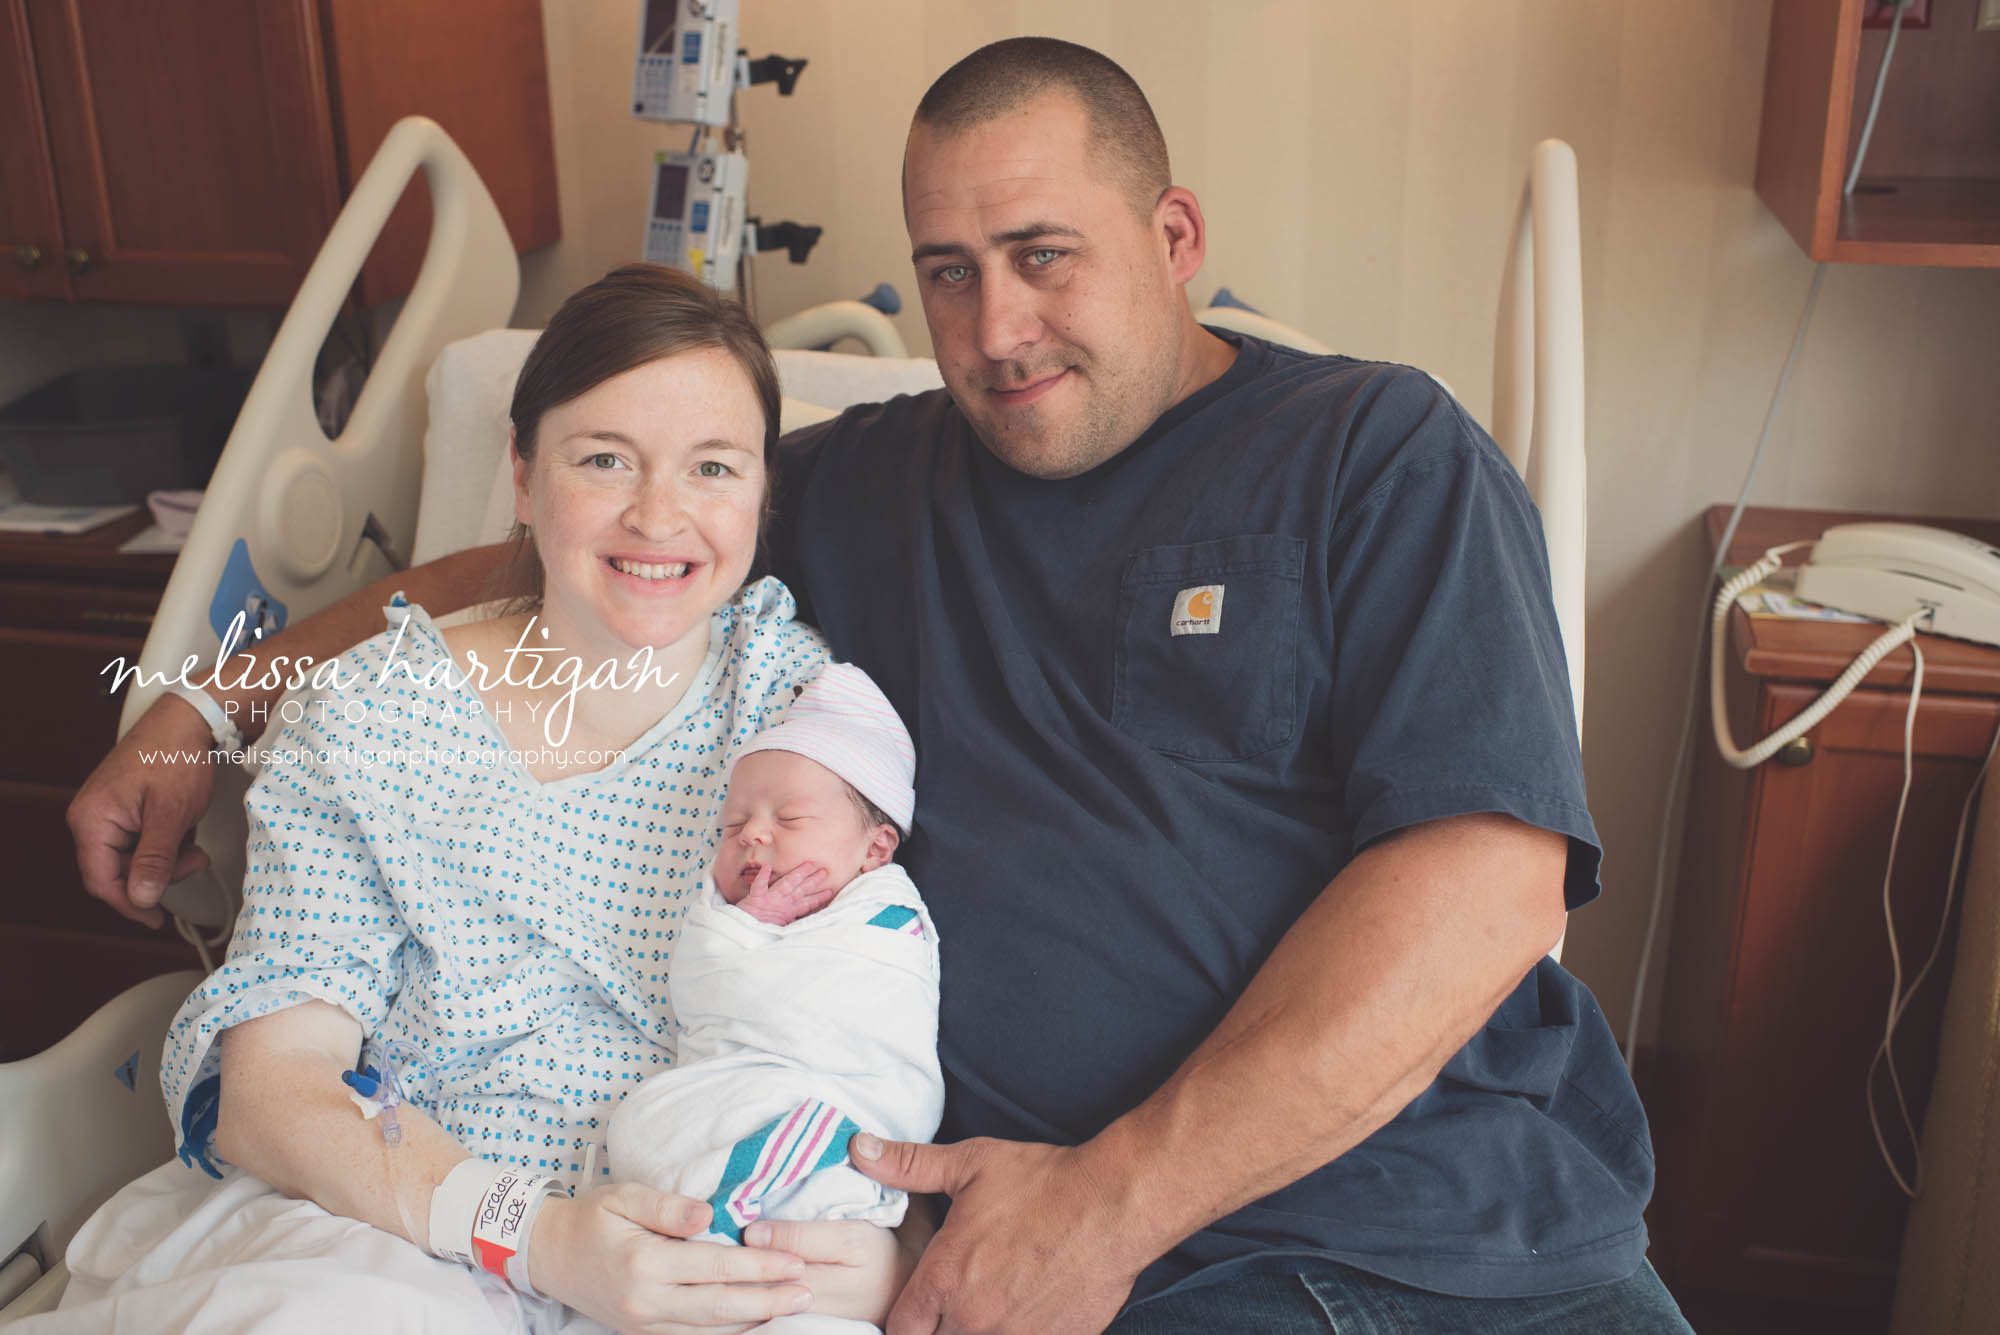 Melissa Hartigan Photography Connecticut Maternity and Newborn Photographer Piper Fresh 48 Newborn Session parents holding new baby girl in hospital